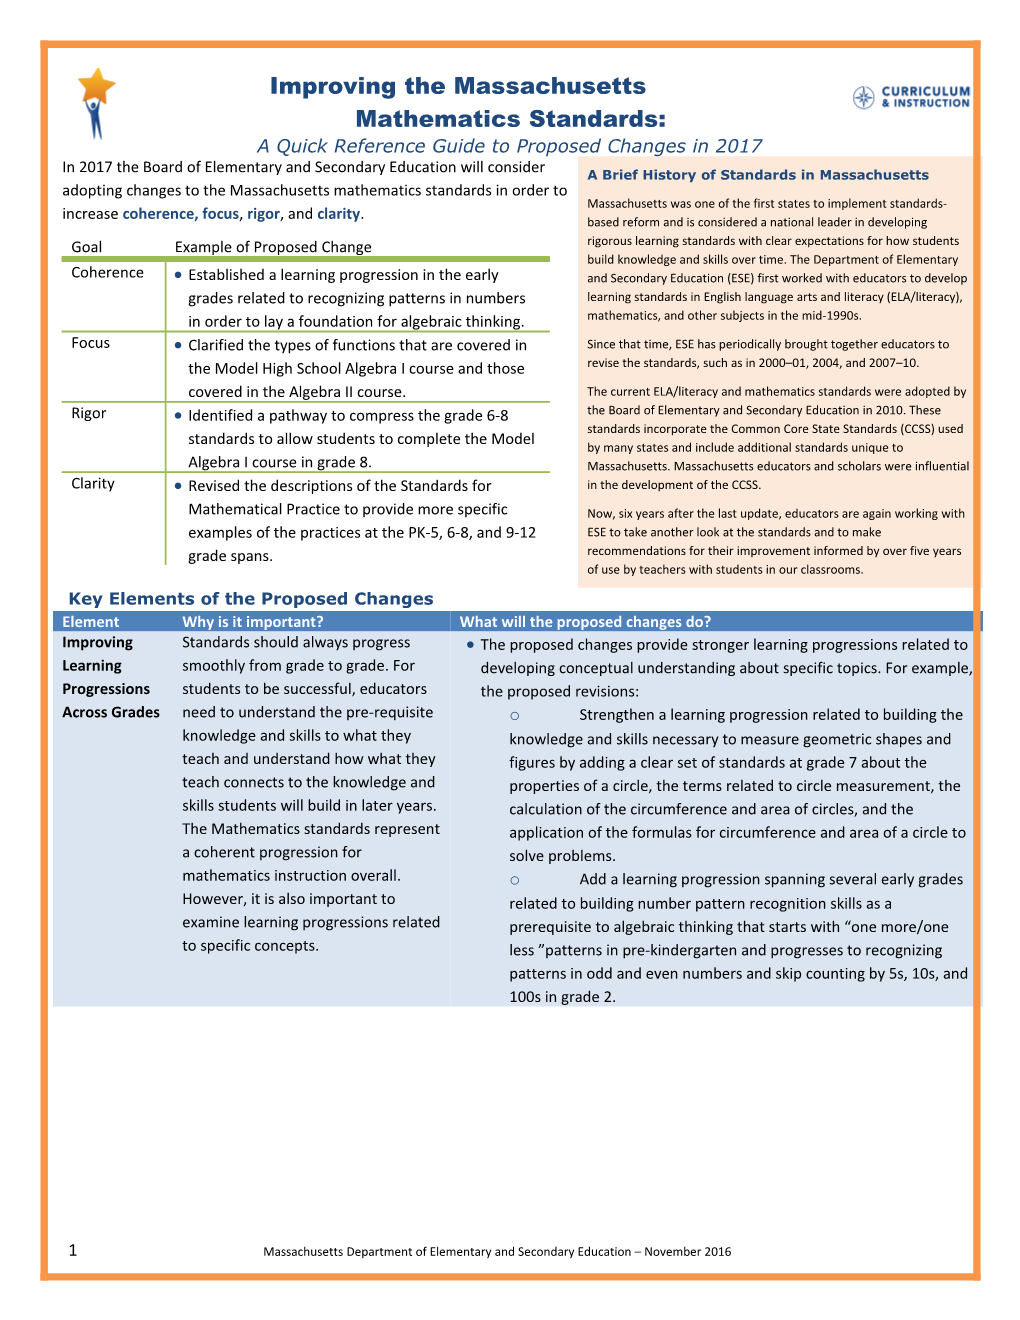 Improving the Massachusetts Mathematics Standards: a Quick Reference Guide to Proposed